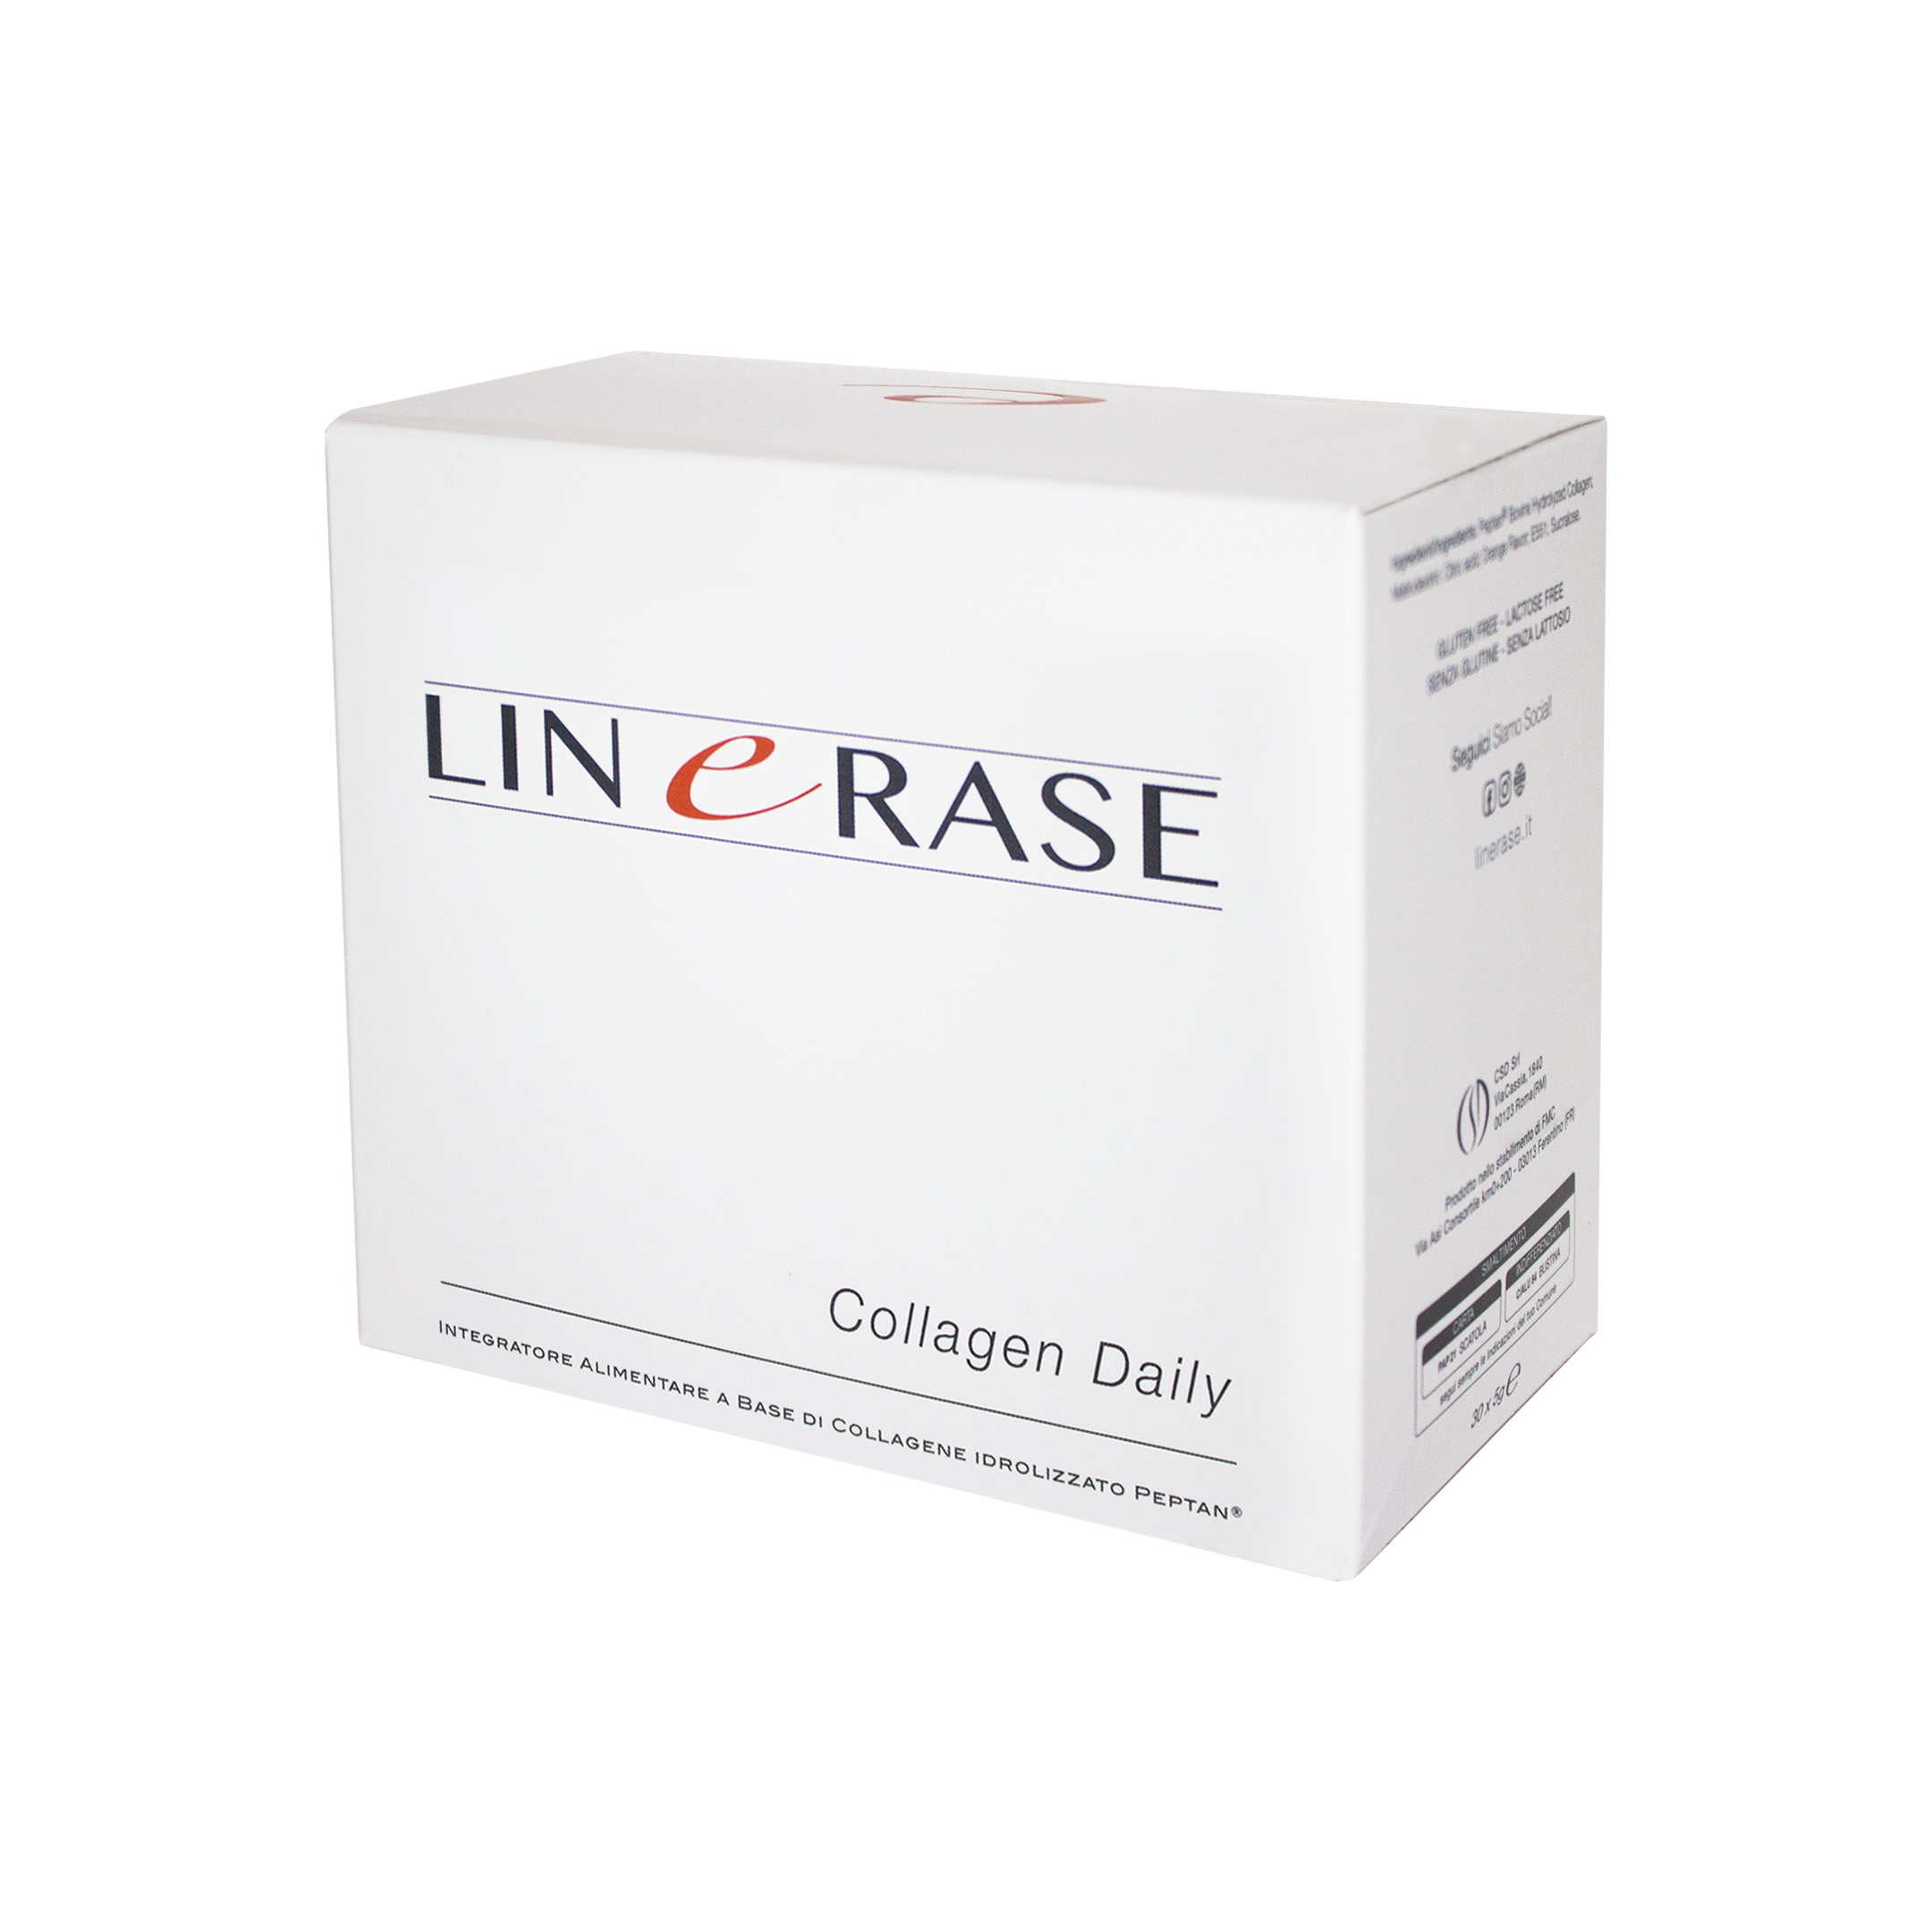 Linerase Collagen Daily Side